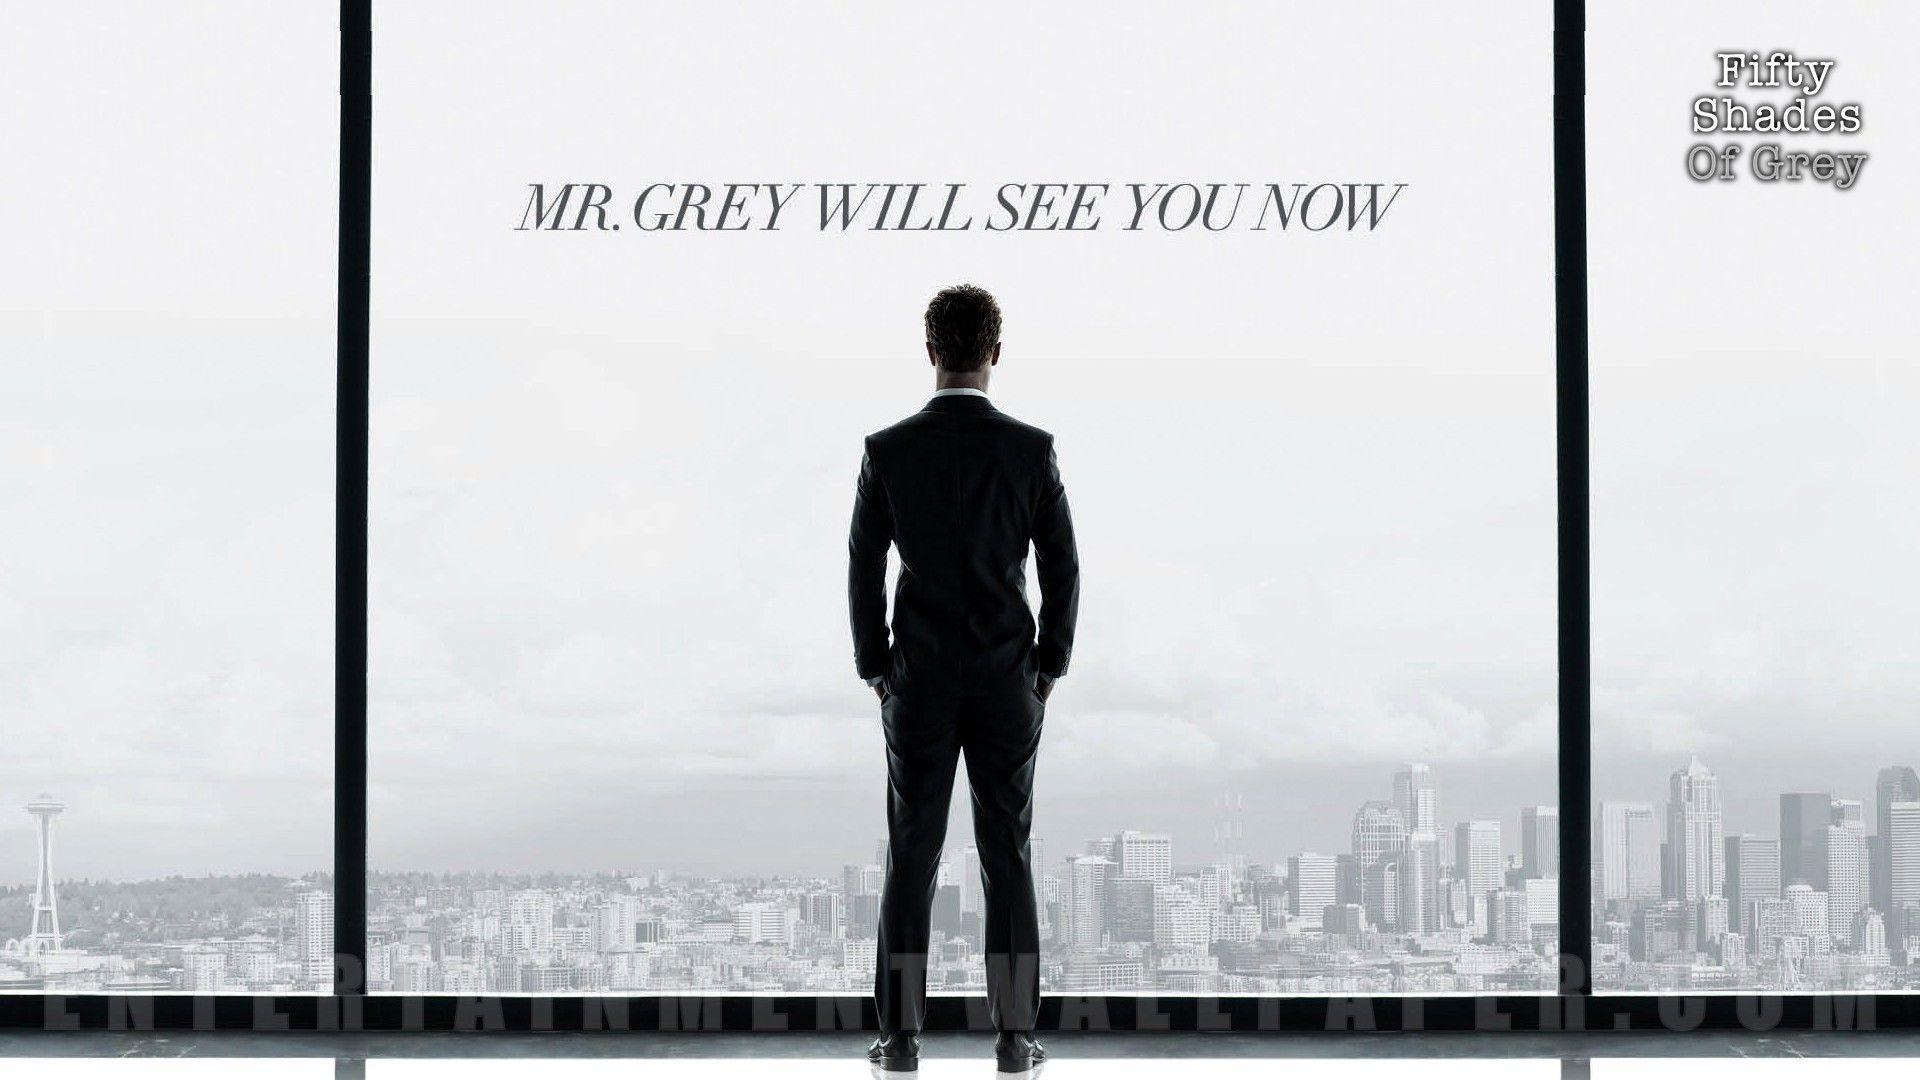 Wallpaper Fifty Shades Of Grey Wallpapers